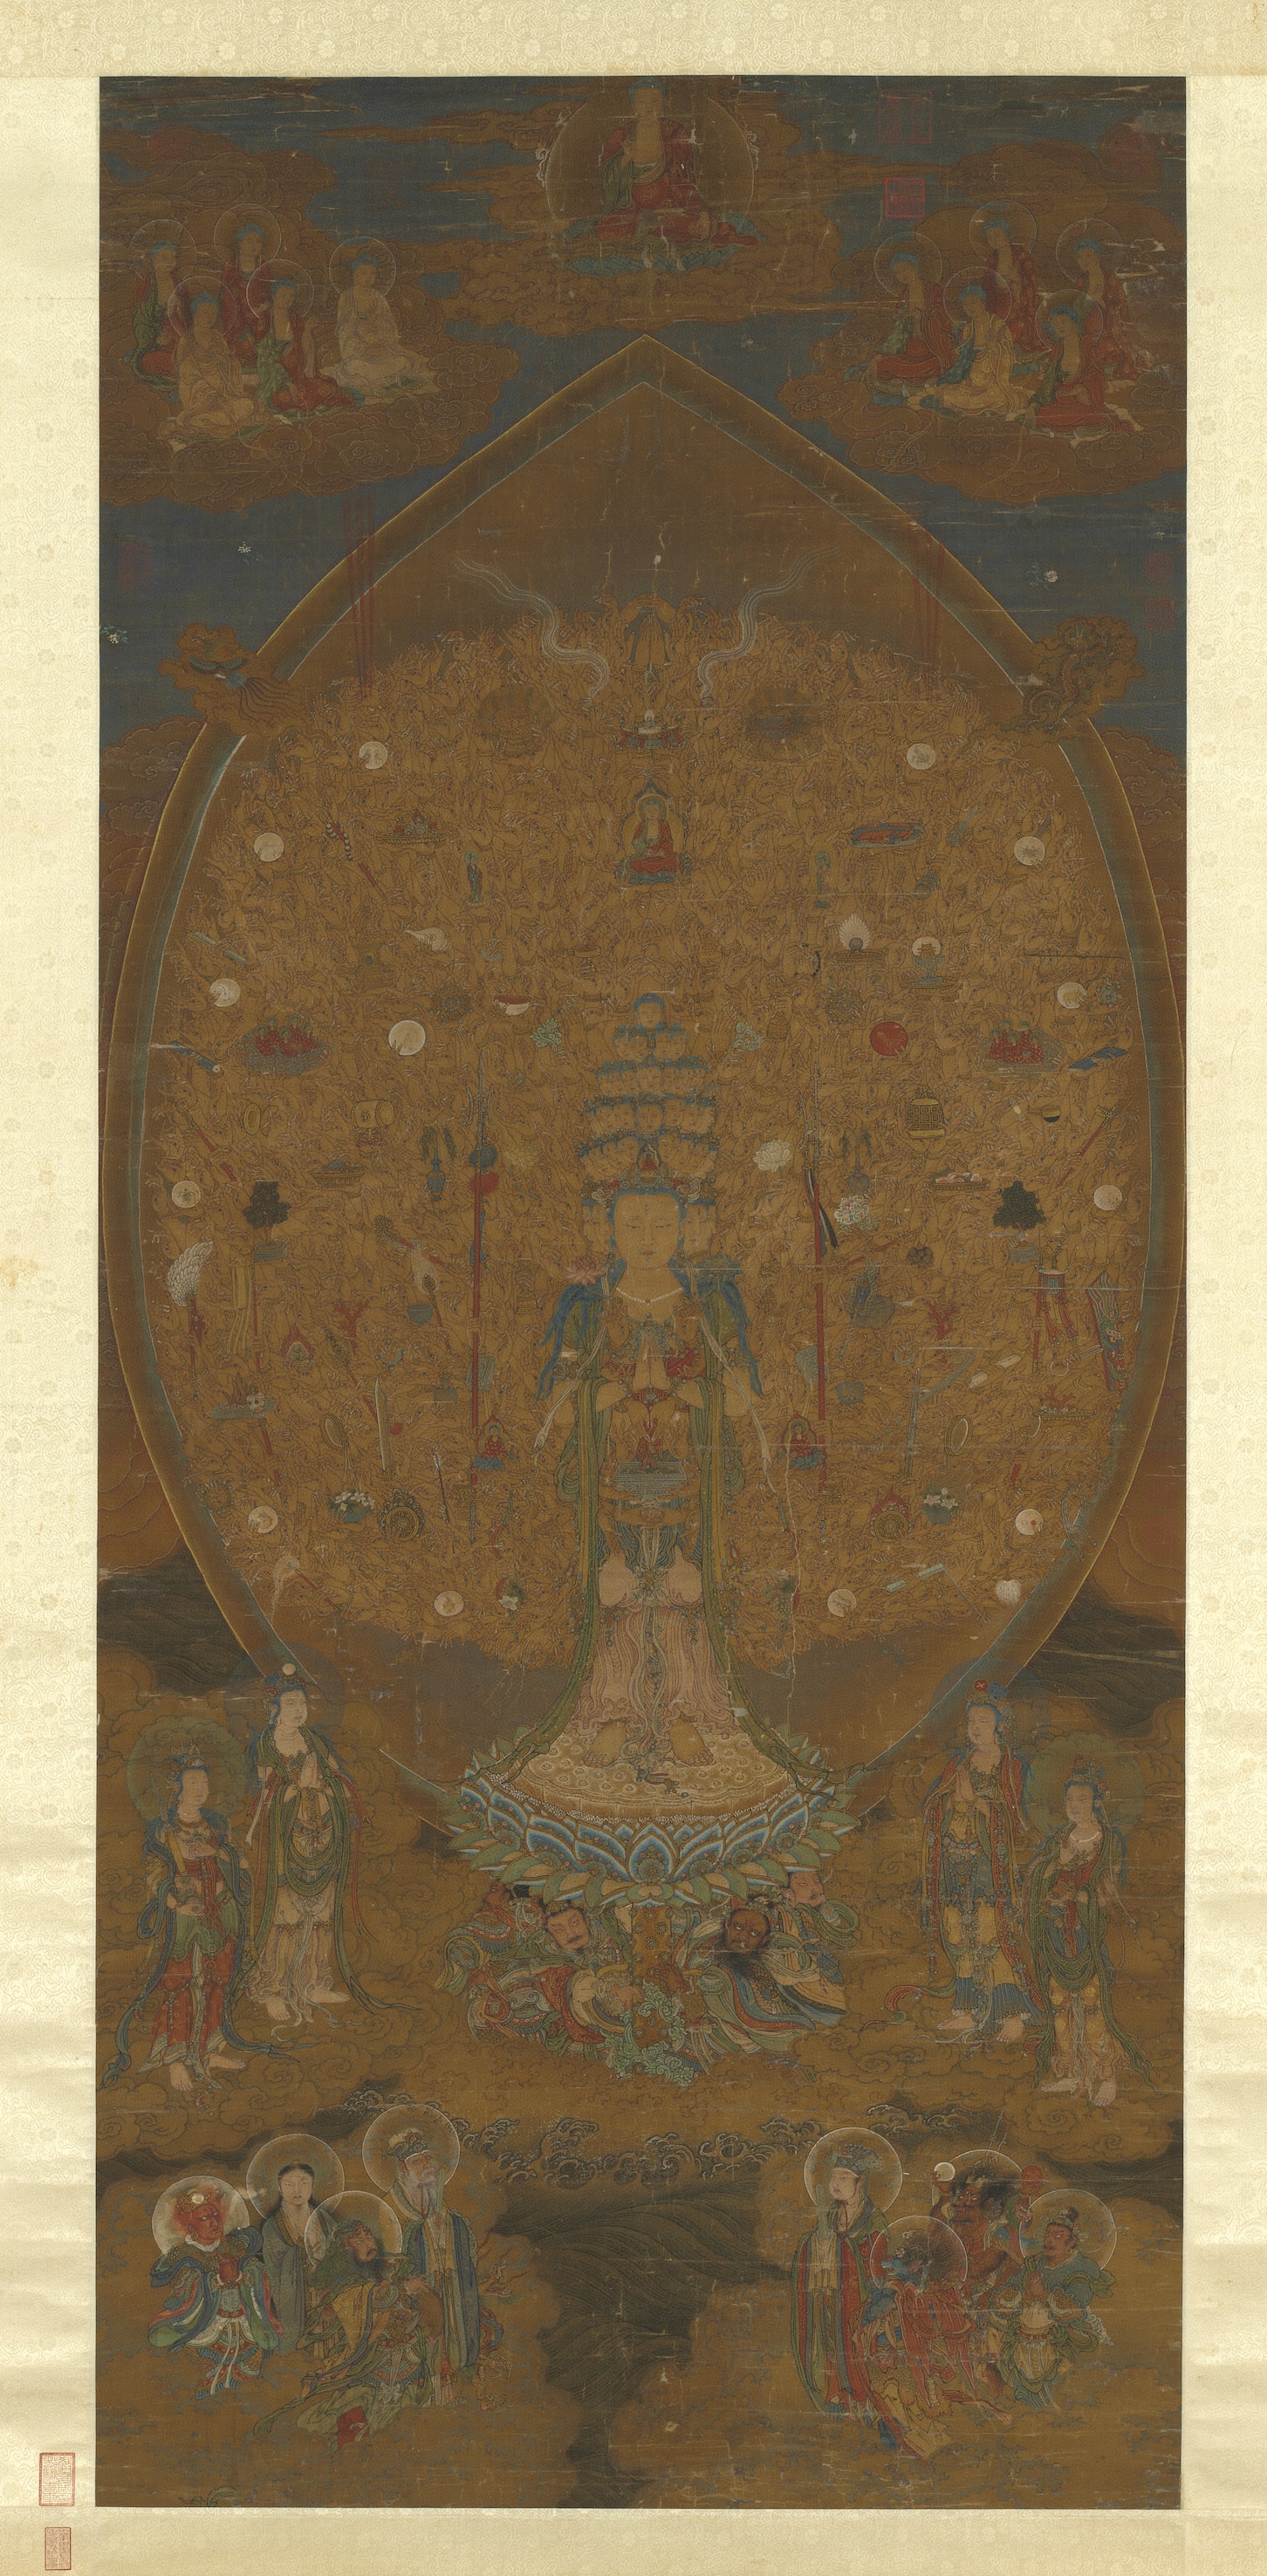 Guanyin of One Thousand Arms and Eyes